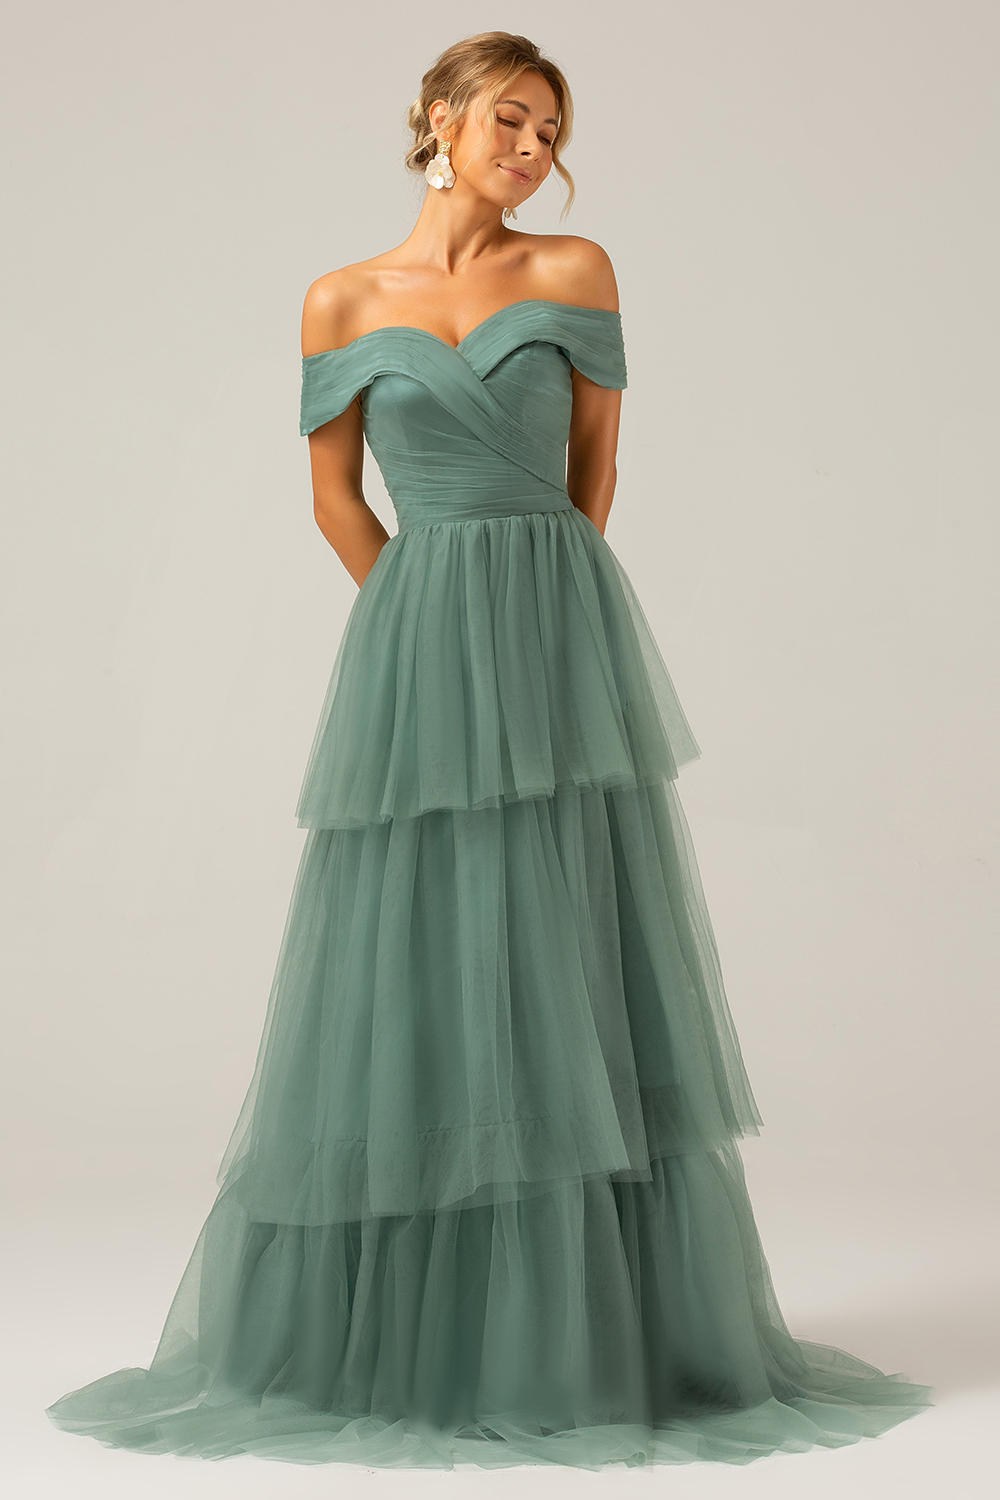 Off the Shoulder A Line Grey Green Tulle Tiered Pleated Bridesmaid Dress